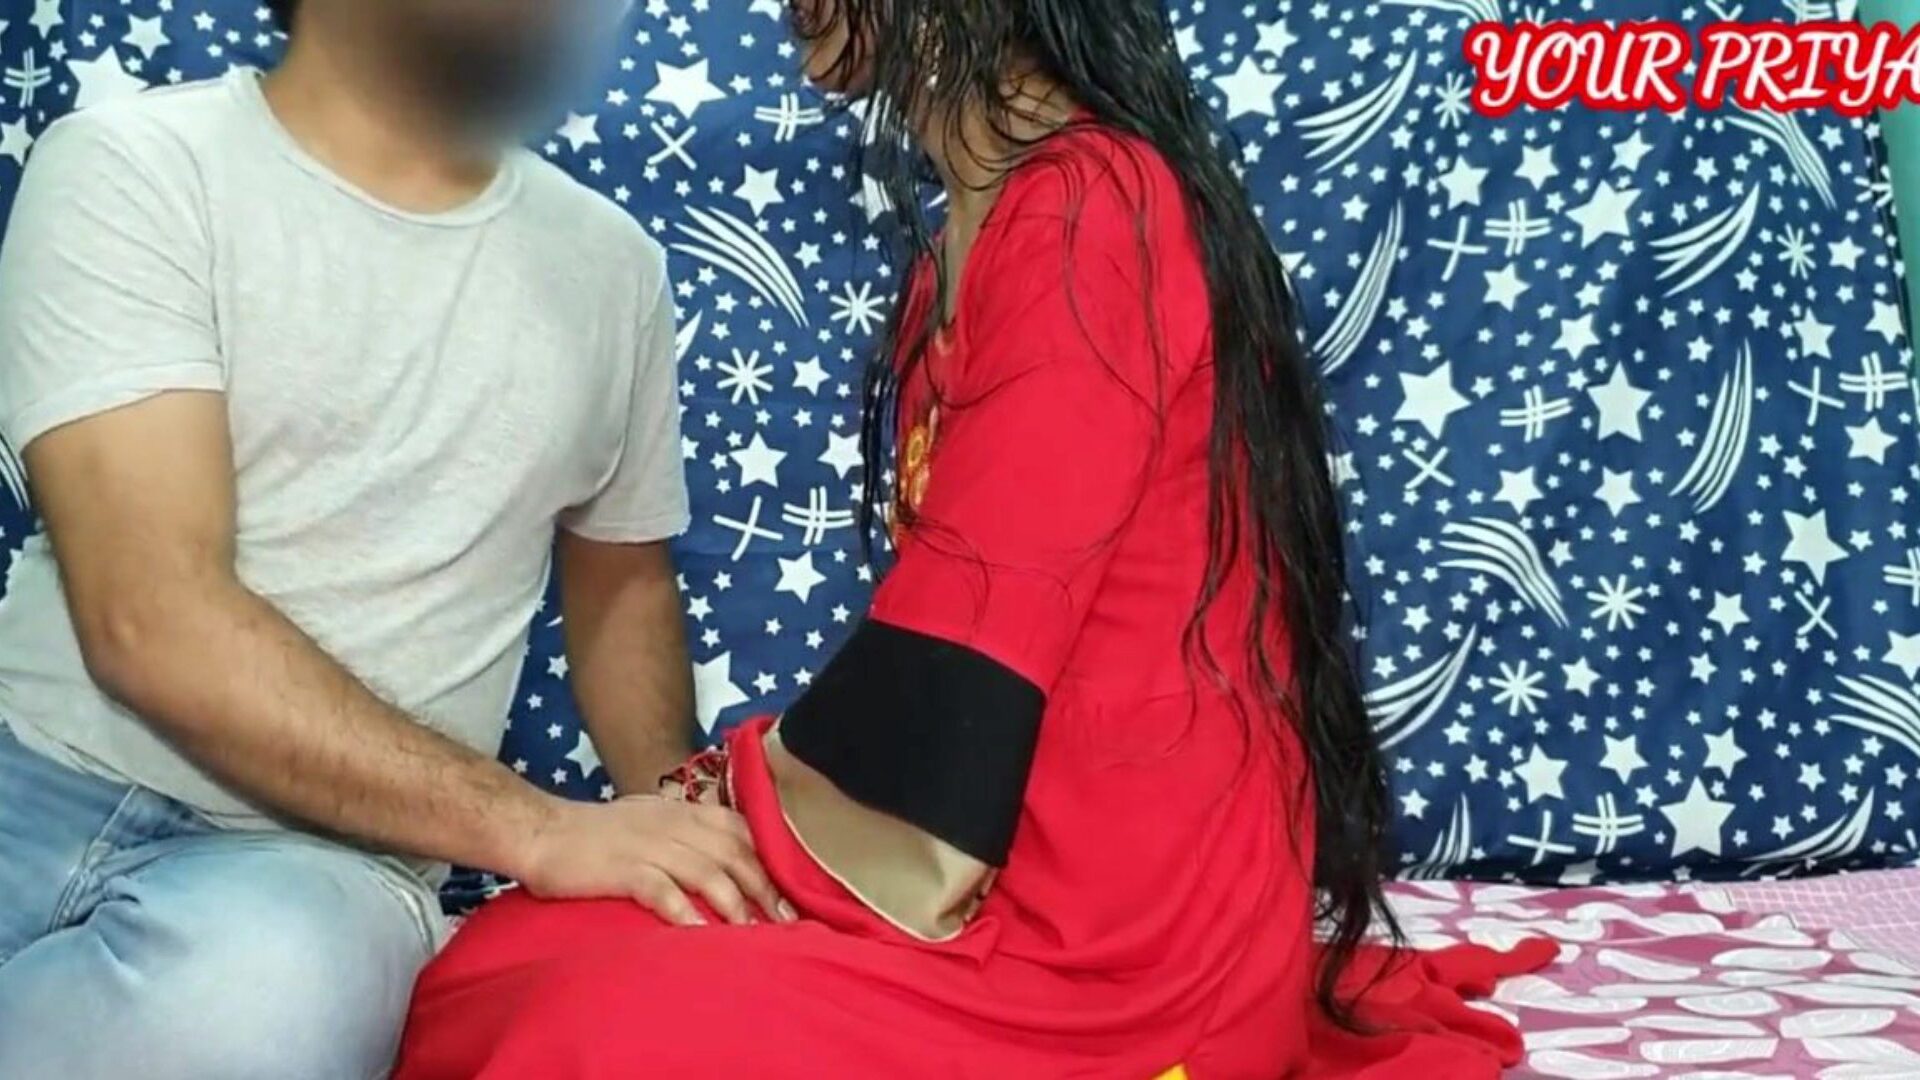 Devar Fuck Your-priya Extremely Hard When Hubby Left... Watch Devar Fuck Your-priya Extremely Hard When Hubby Left Alone clip on xHamster - the ultimate database of free Indian Free Xxx Fuck HD pornography tube videos